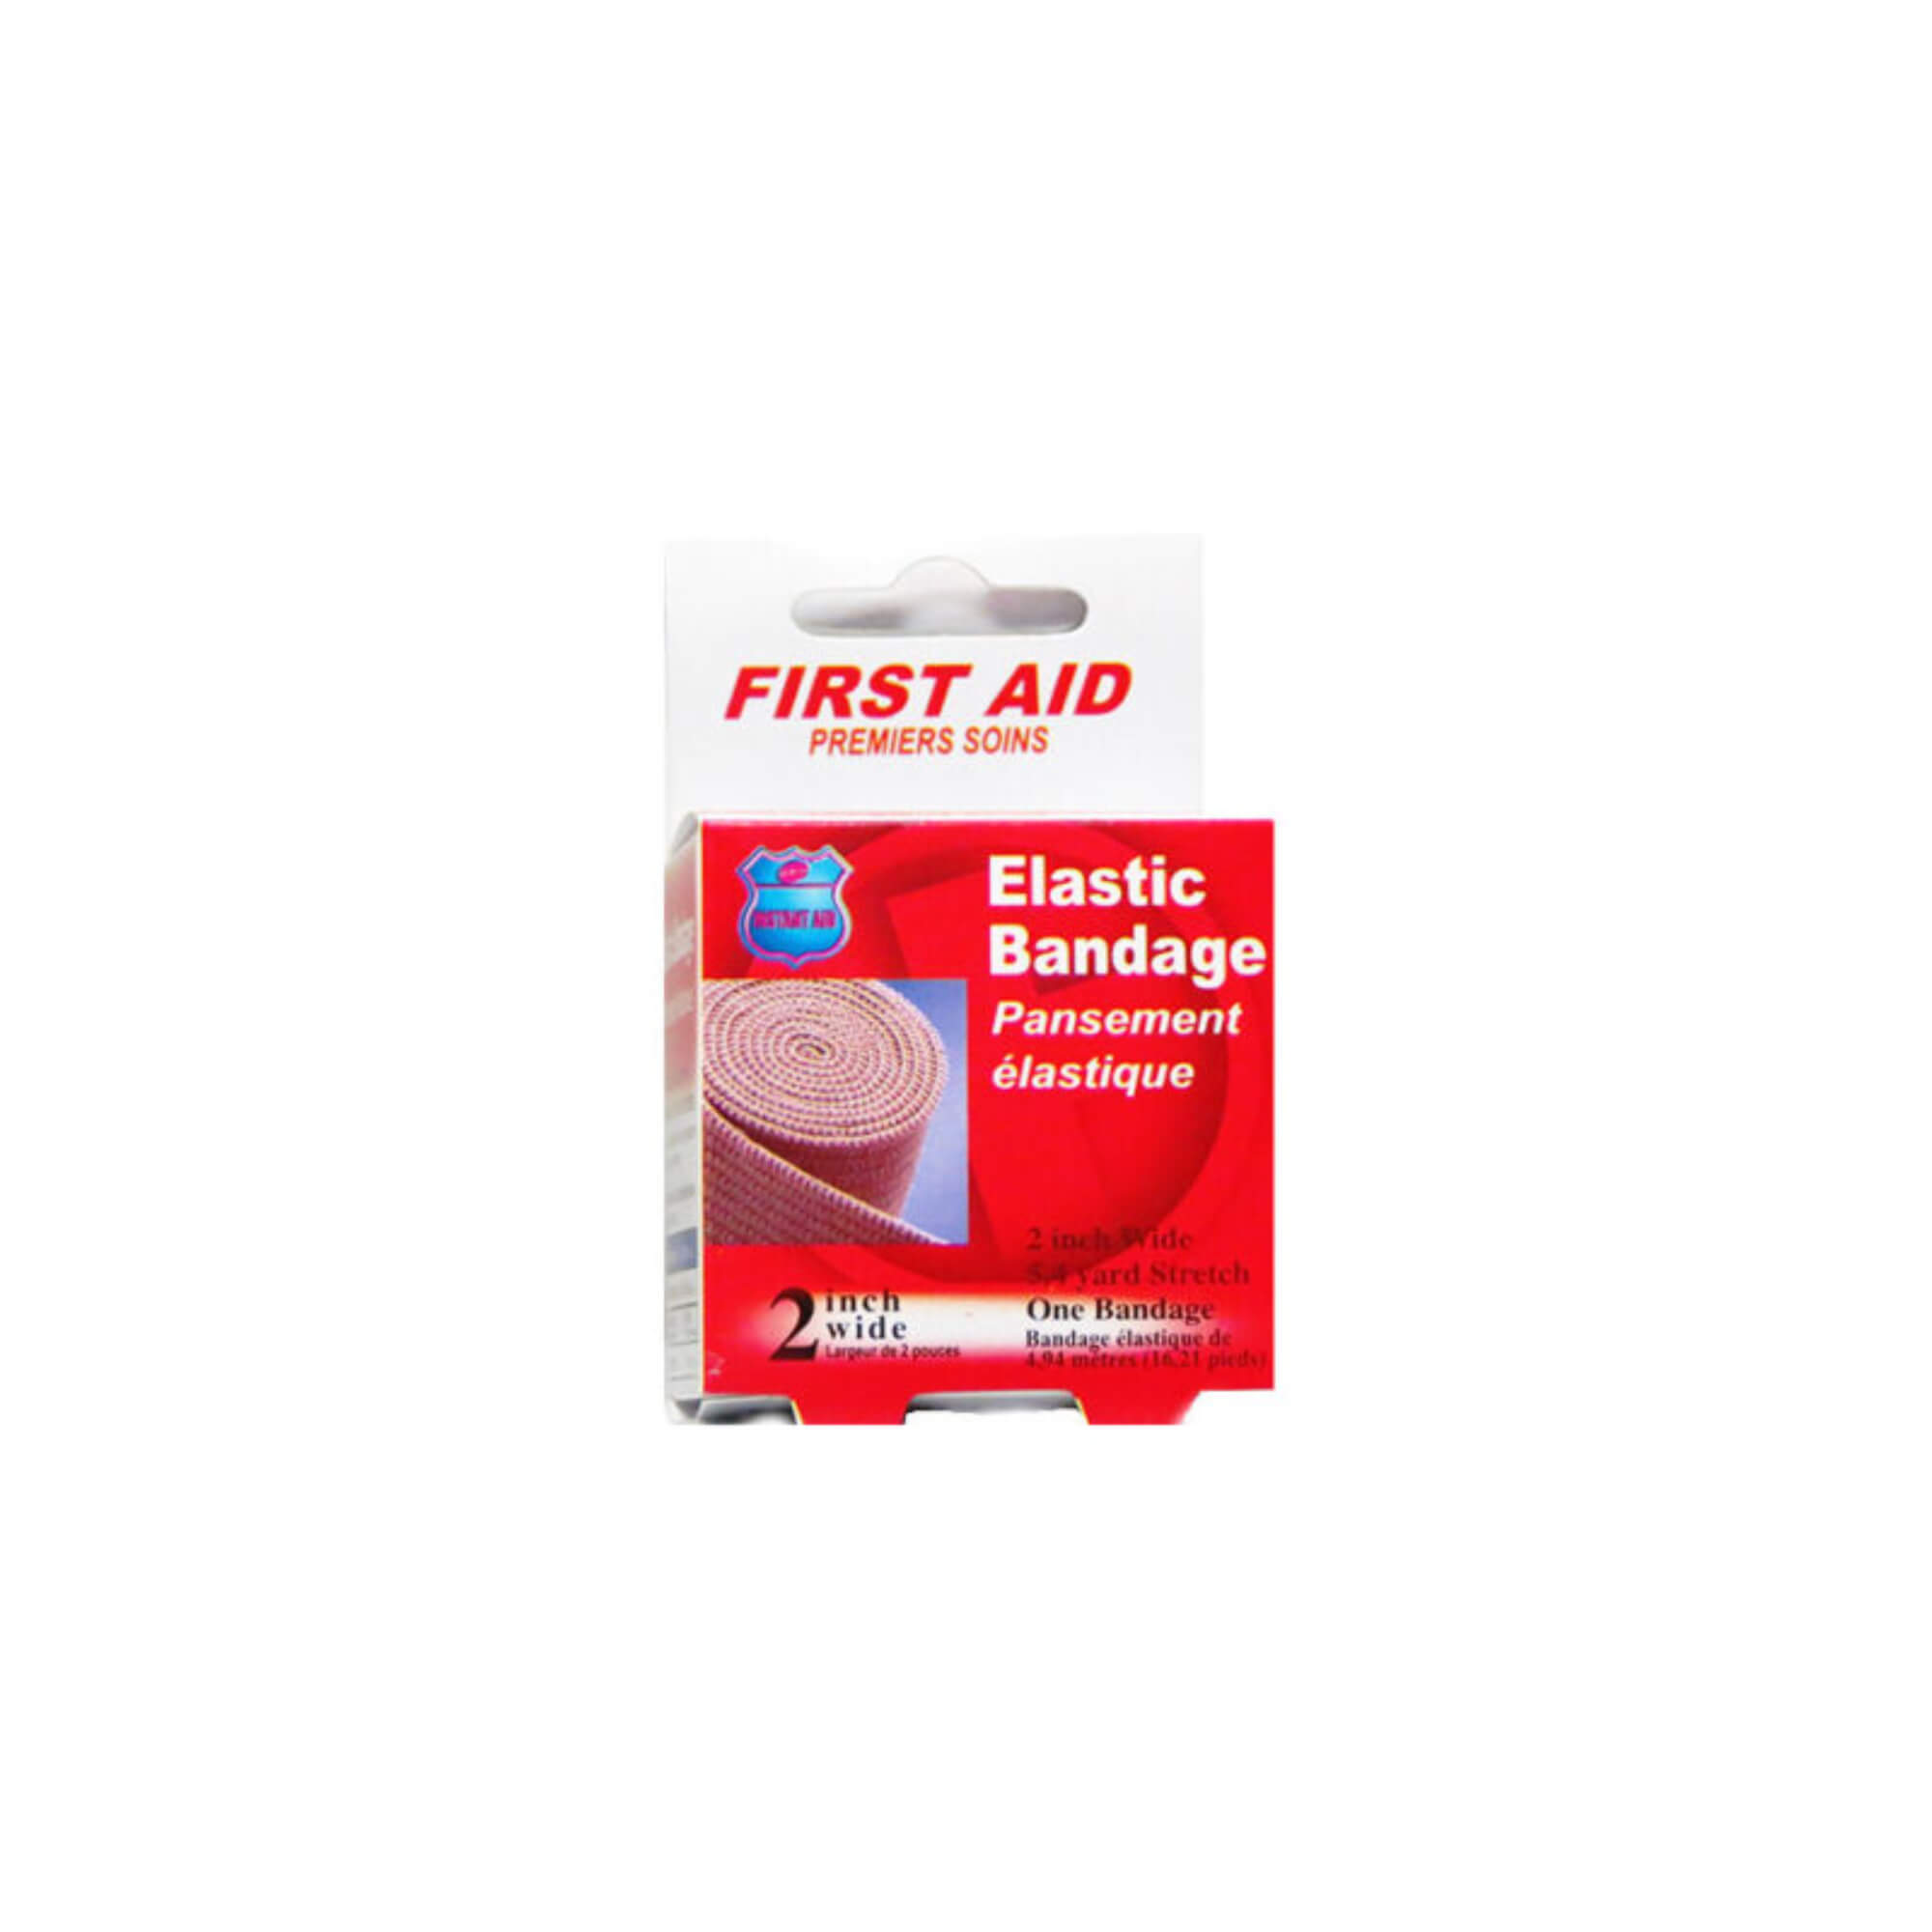 Purest Instant Aid- 2 Inch Wide Elastic Bandage - Pack of 6